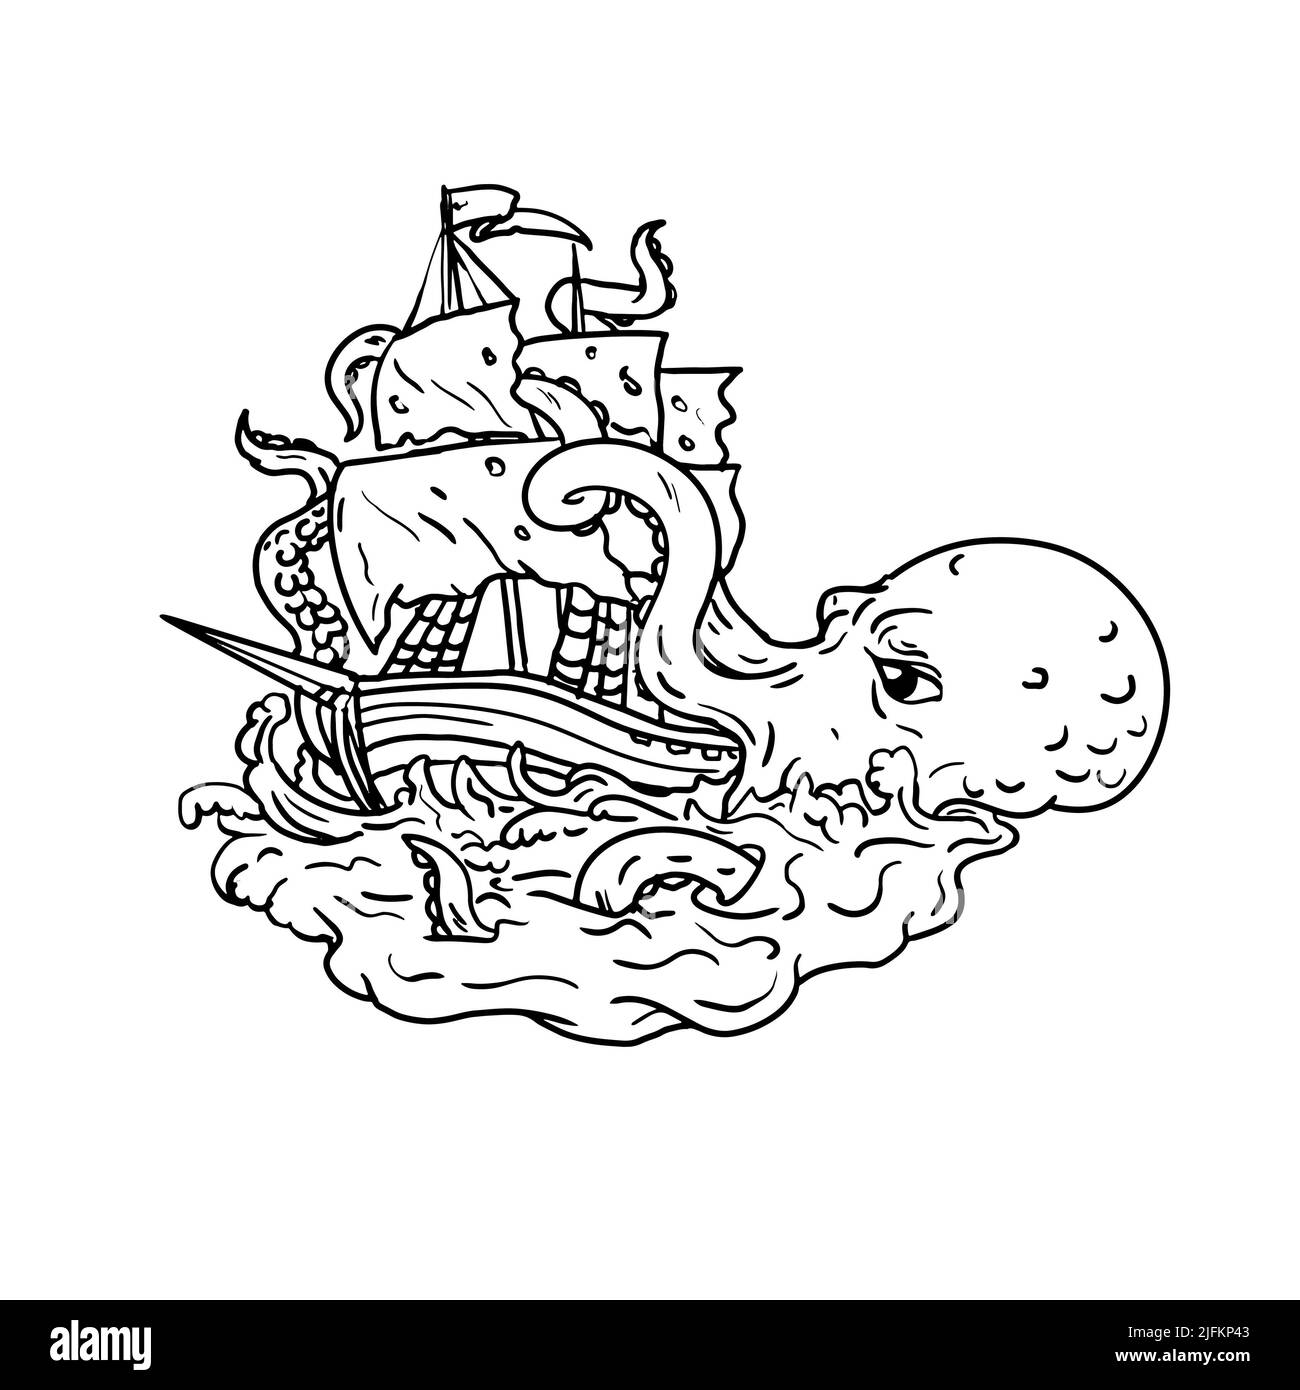 Doodle art illustration of a kraken, a legendary cephalopod-like giant sea monster attacking a sailing ship with its tentacles on sea with tumultuous Stock Photo